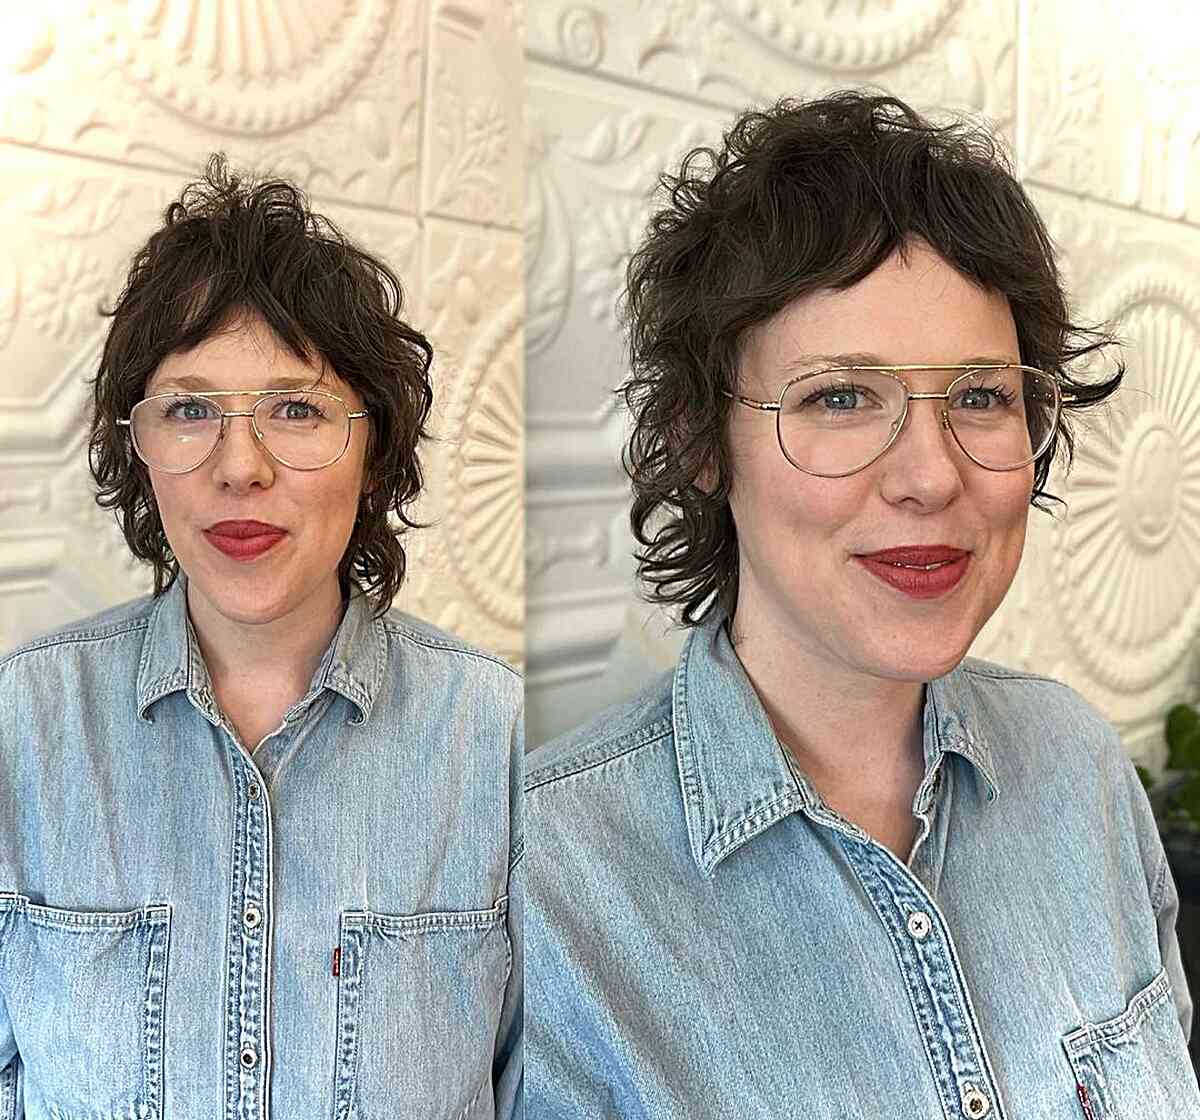 Curly Mixie with Micro Bangs